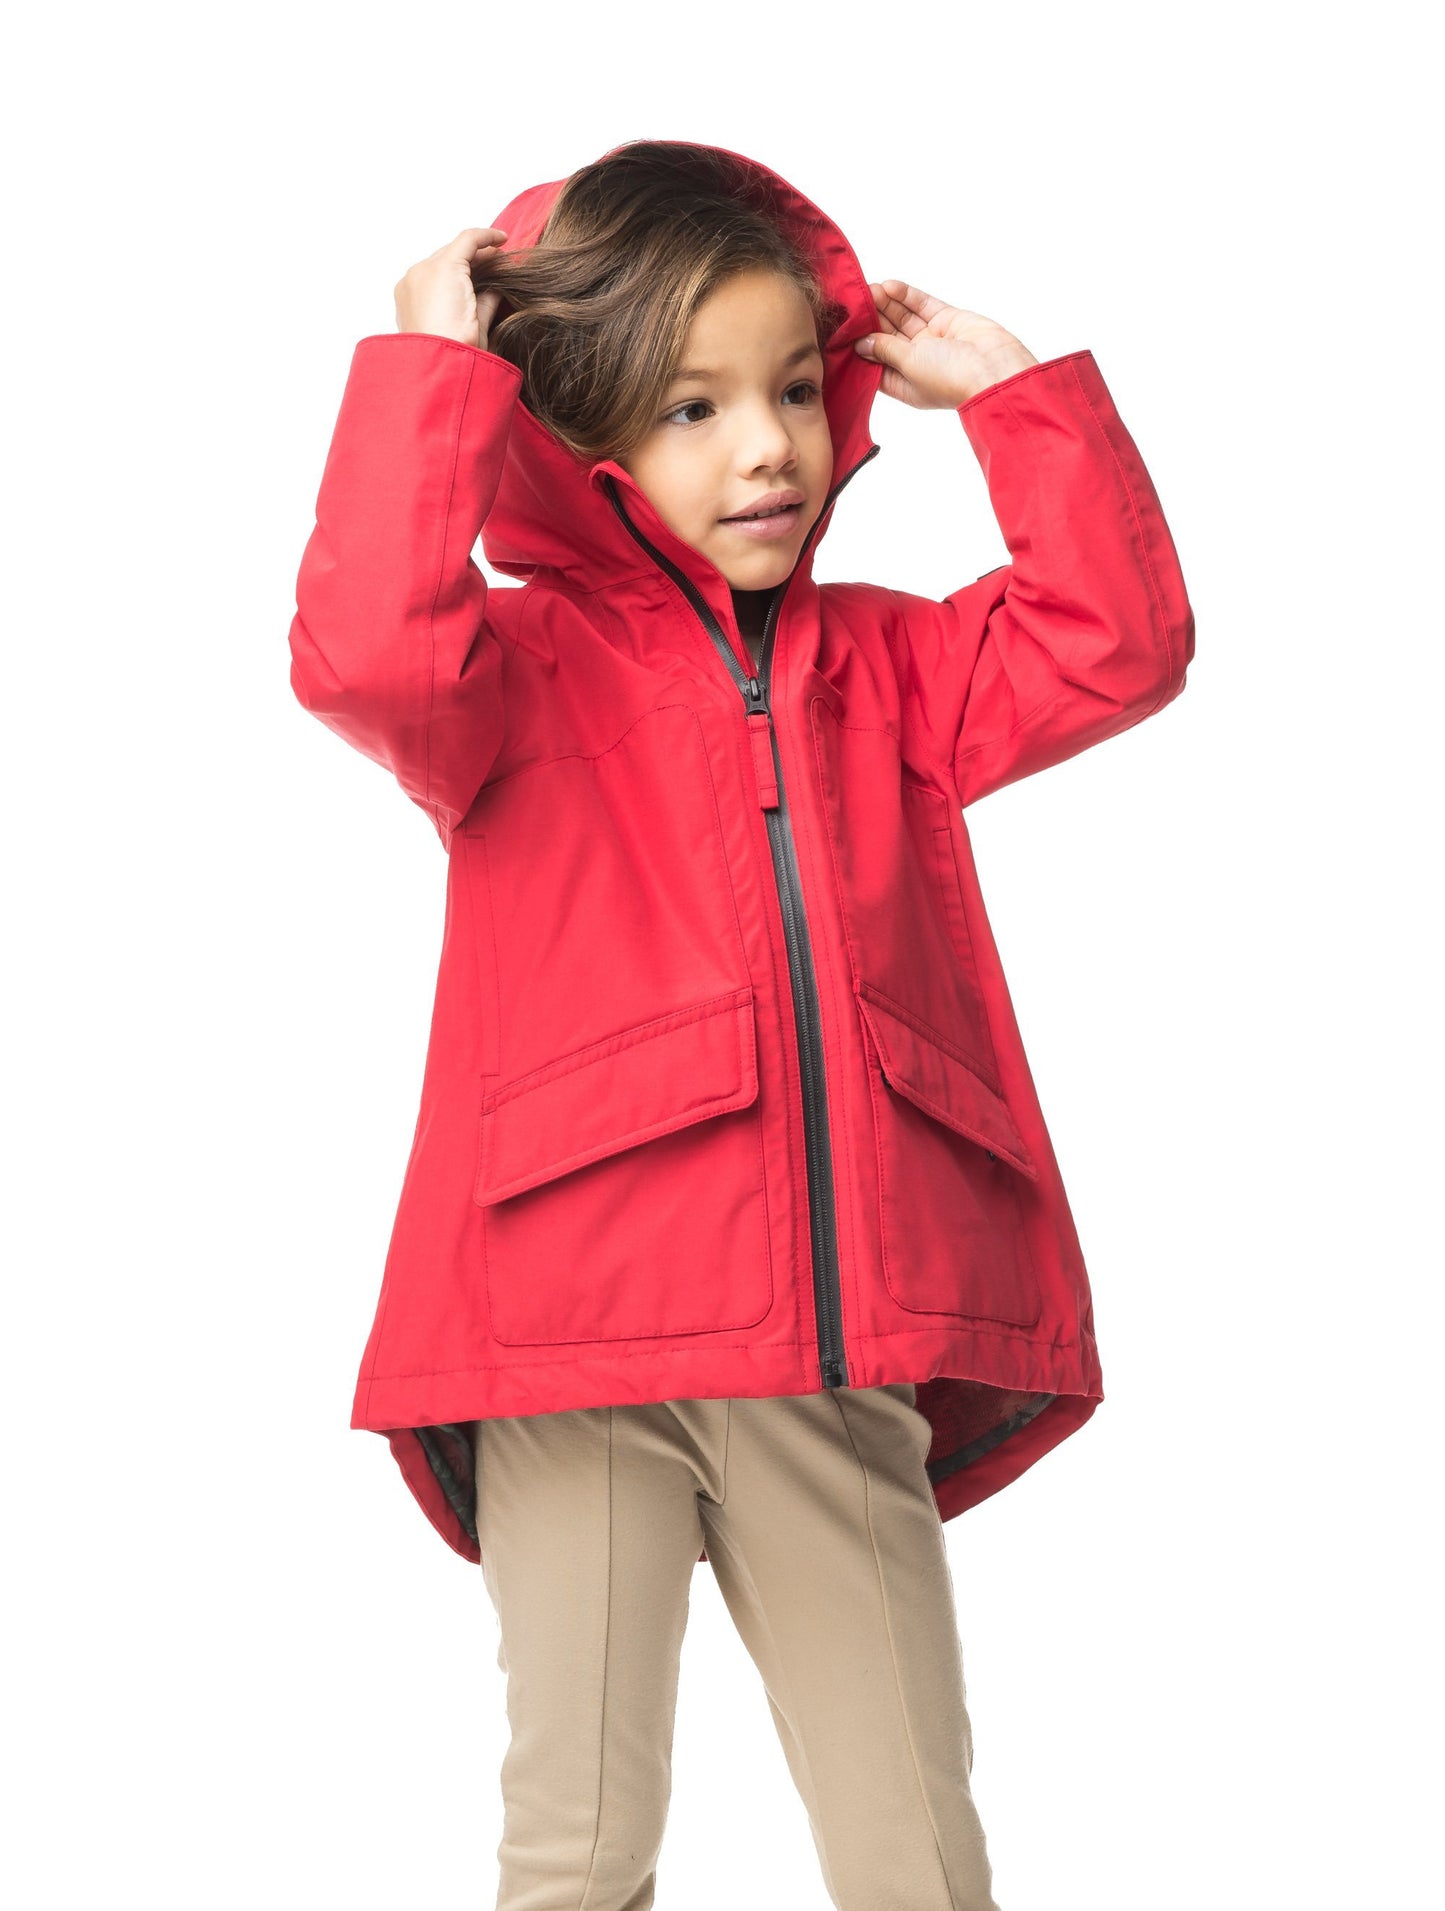 Kid's hip length fishtail rain jacket with hood in Red